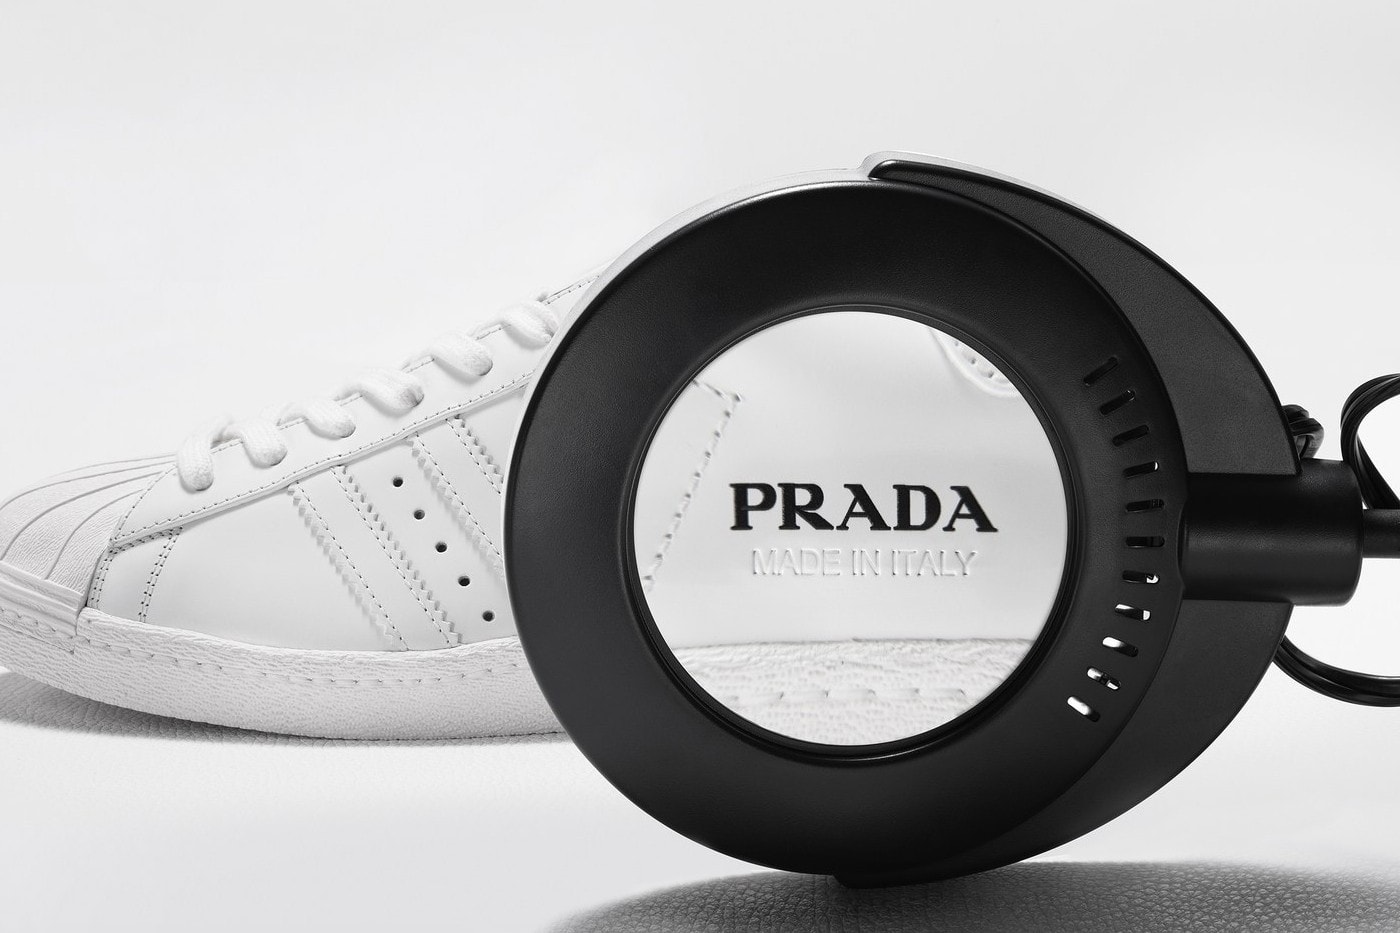 Prada adidas Superstar Collaboration Leaked images footwear shoes sneakers kicks runners trainers made in italy three colorways march py_rates_ miucci originals three stripes 